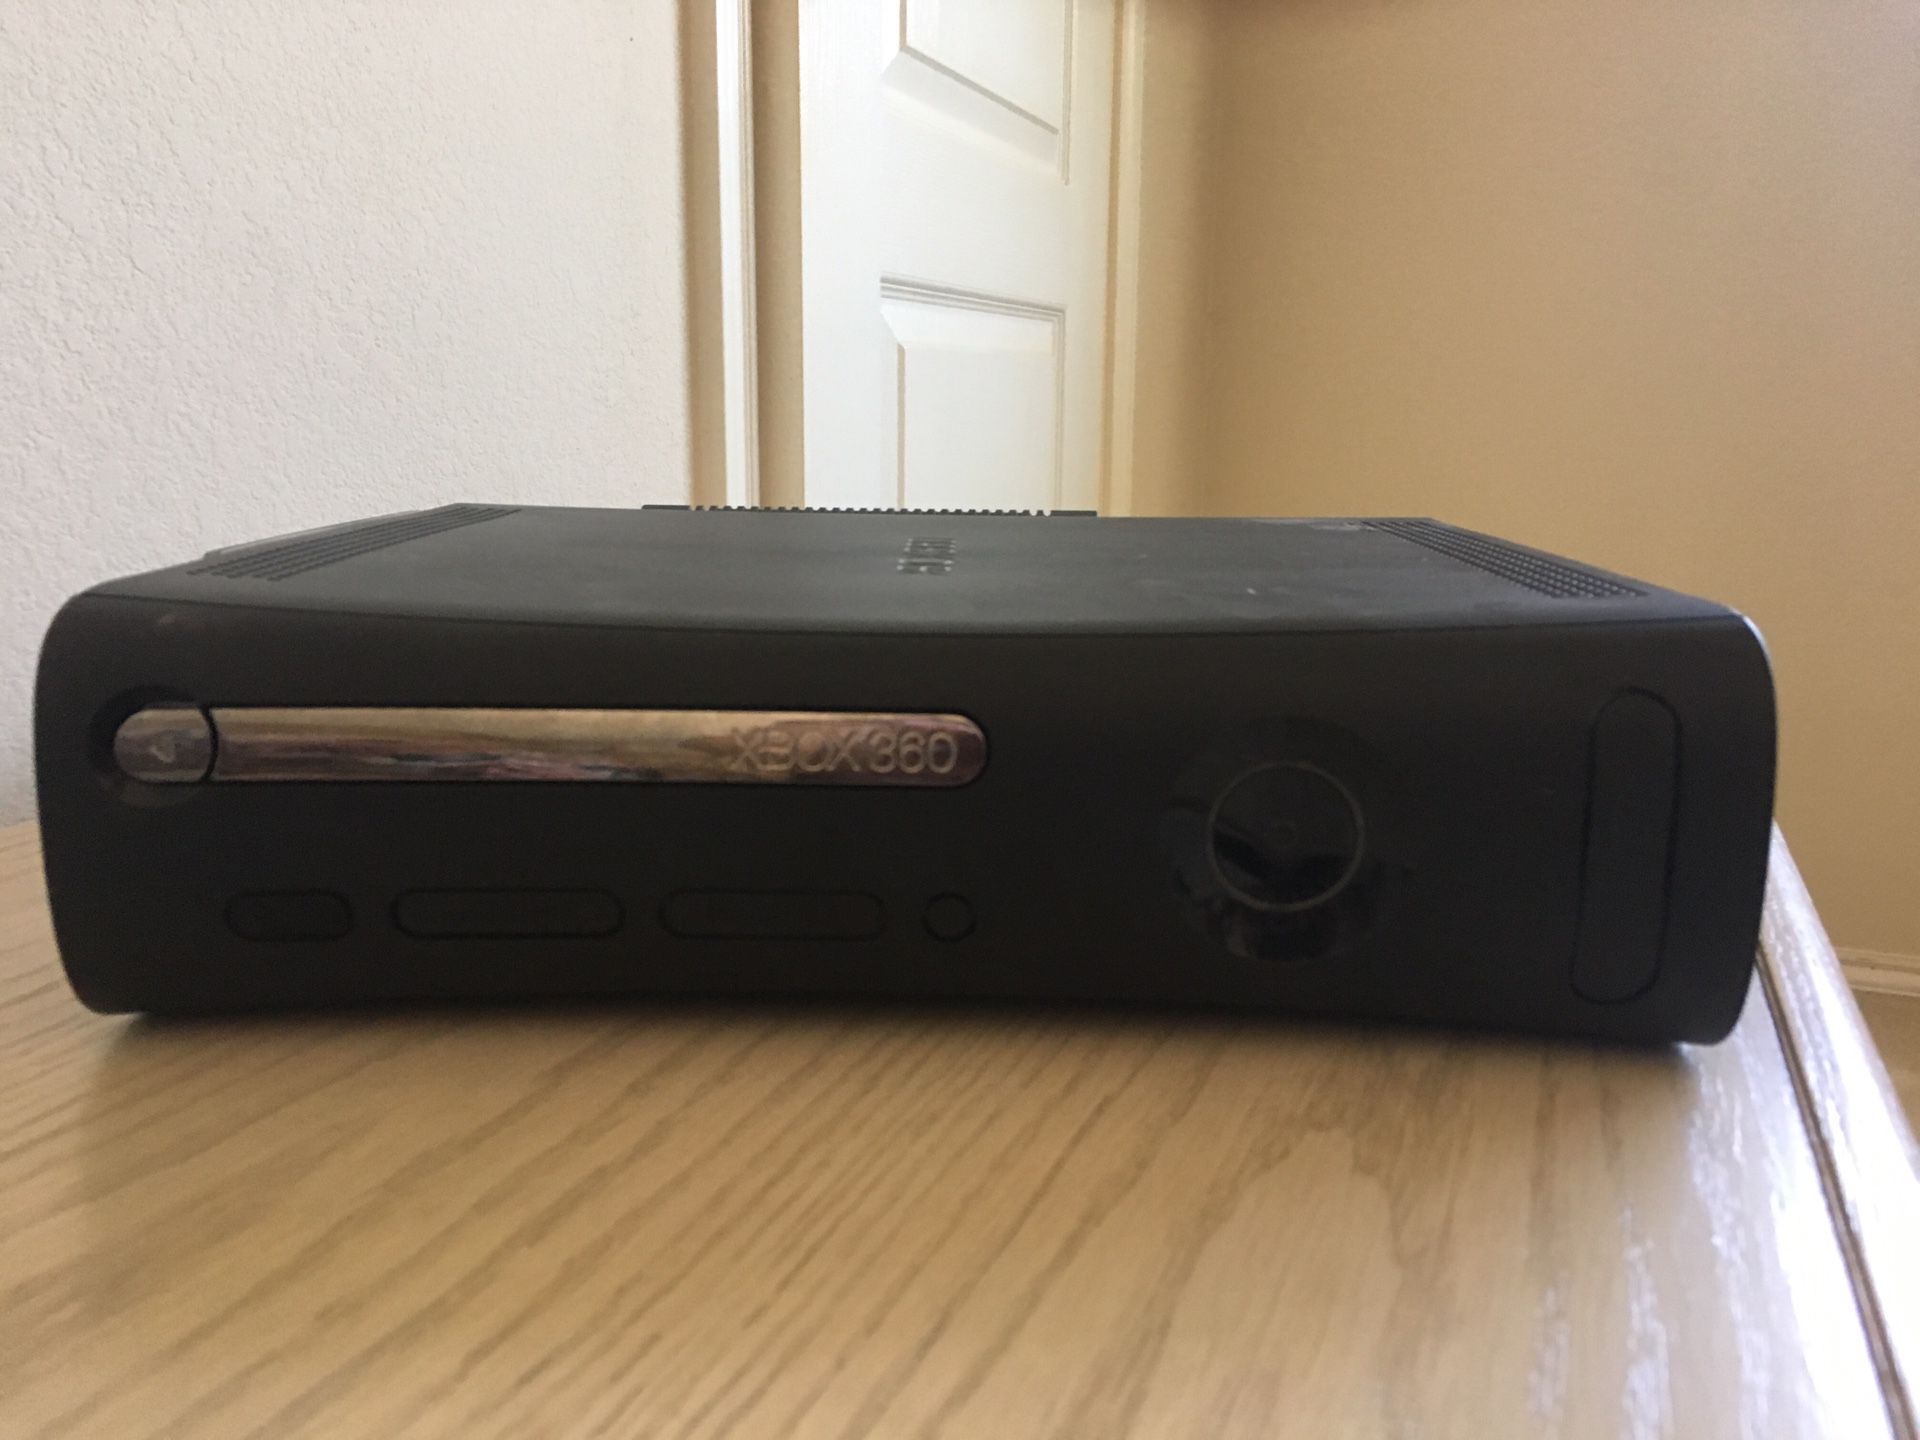 XBOX 360 & games for sale - Great deal !!